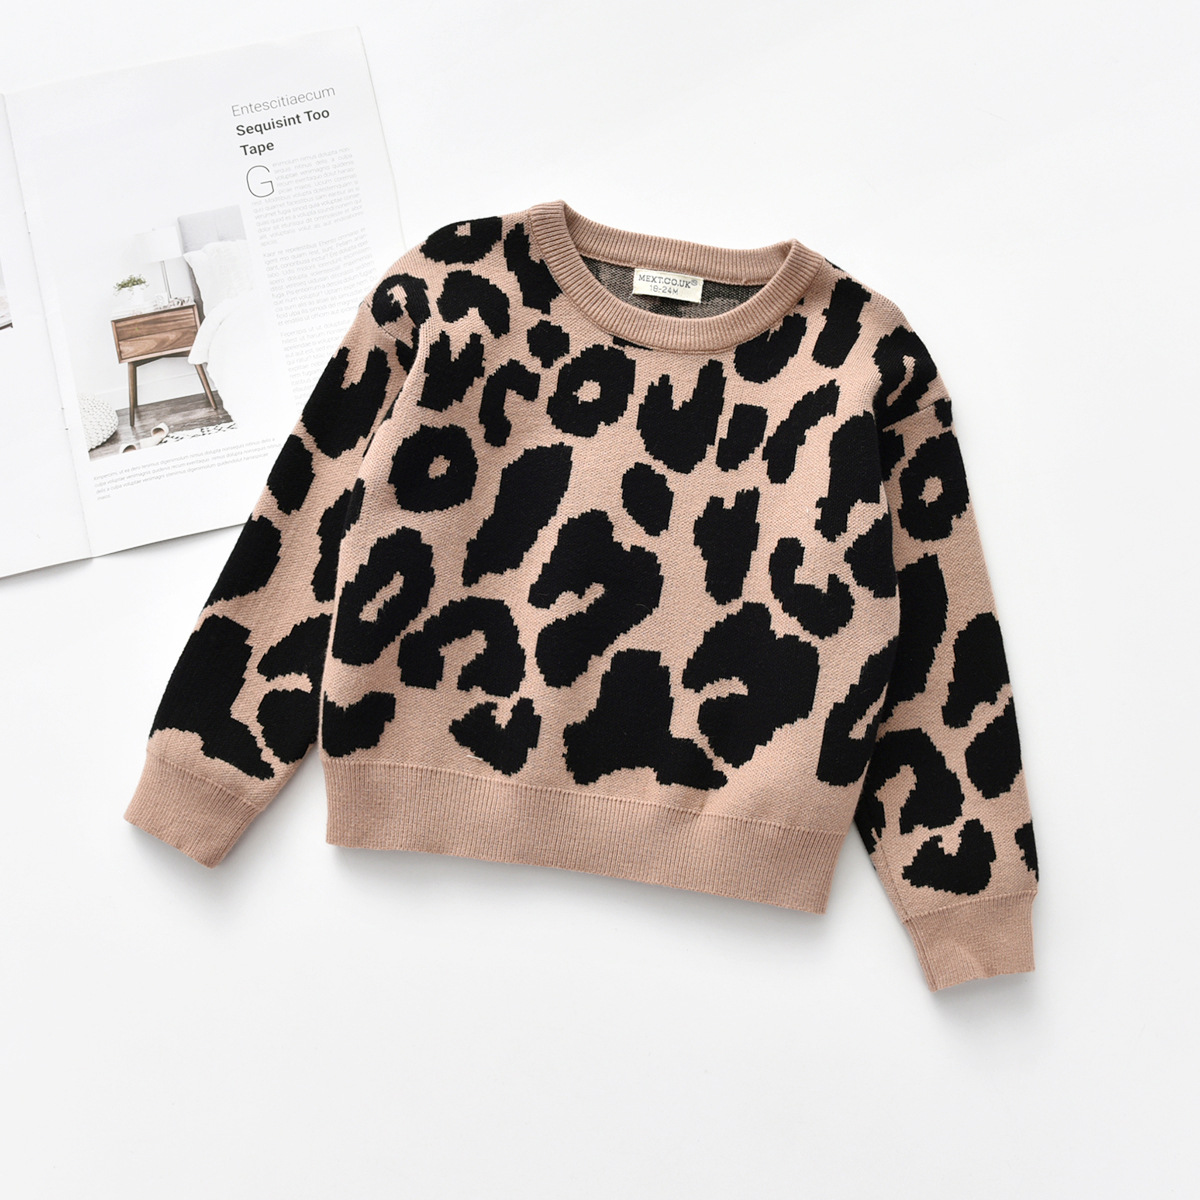 Fall Winter Kids Baby Boys Sweaters Leopard Printed Knitted Pullover Casual Long Sleeve Tops Toddler Girl Boy Clothes 2-6 Years